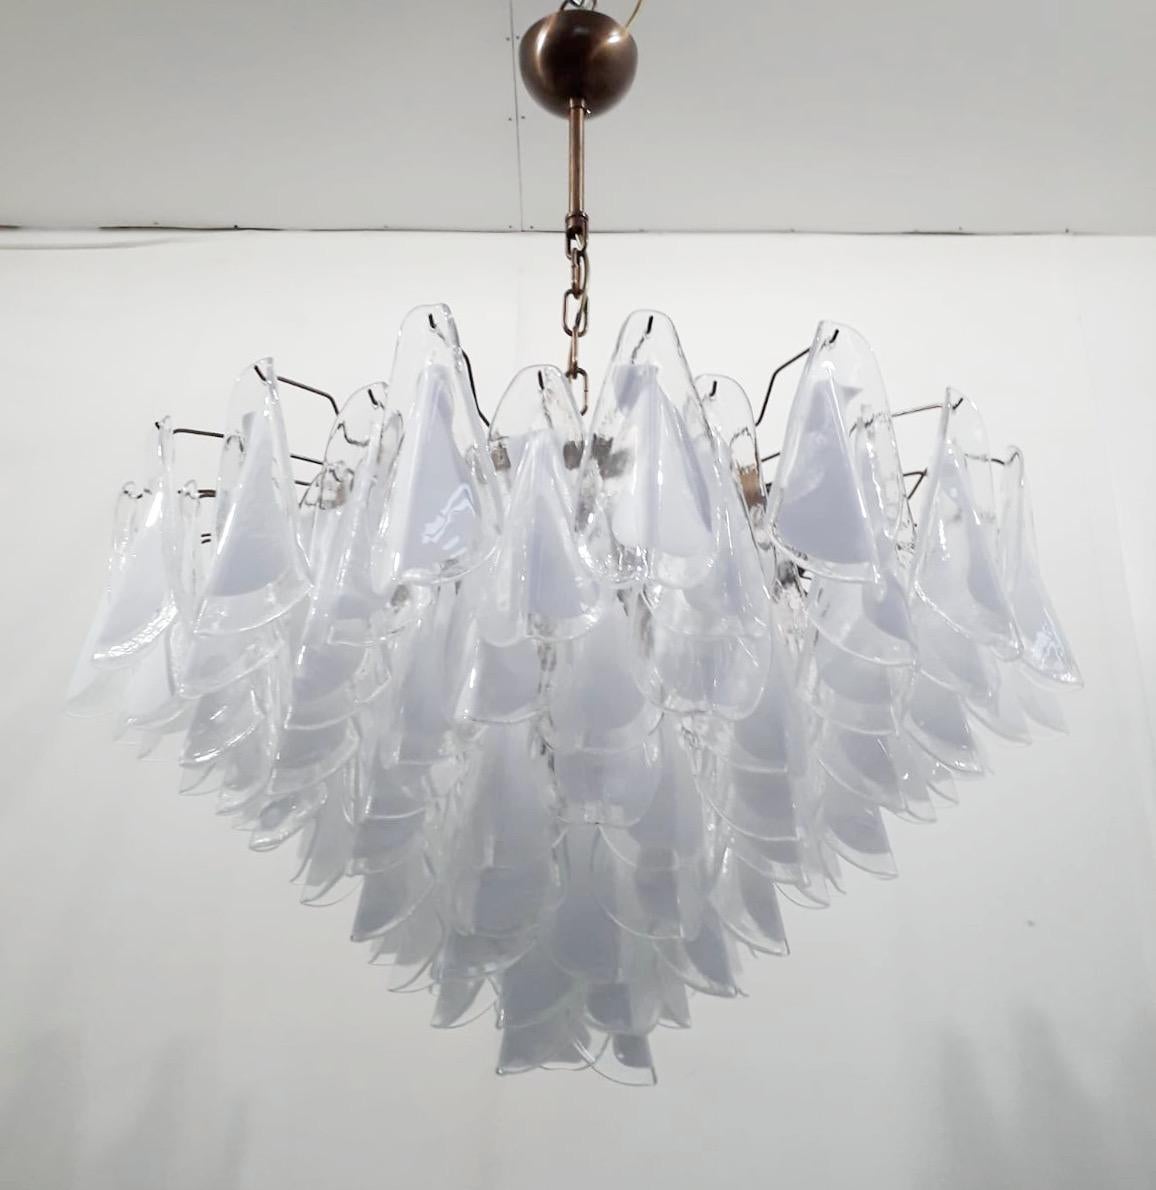 Italian chandelier with milky white Murano glass petals, mounted on bronzed frame by Fabio Ltd / Made in Italy
12-light / E26 or E27 type / max 60W each
Measures: Diameter 40 inches, height 24 inches plus chain and canopy
Order only / This item